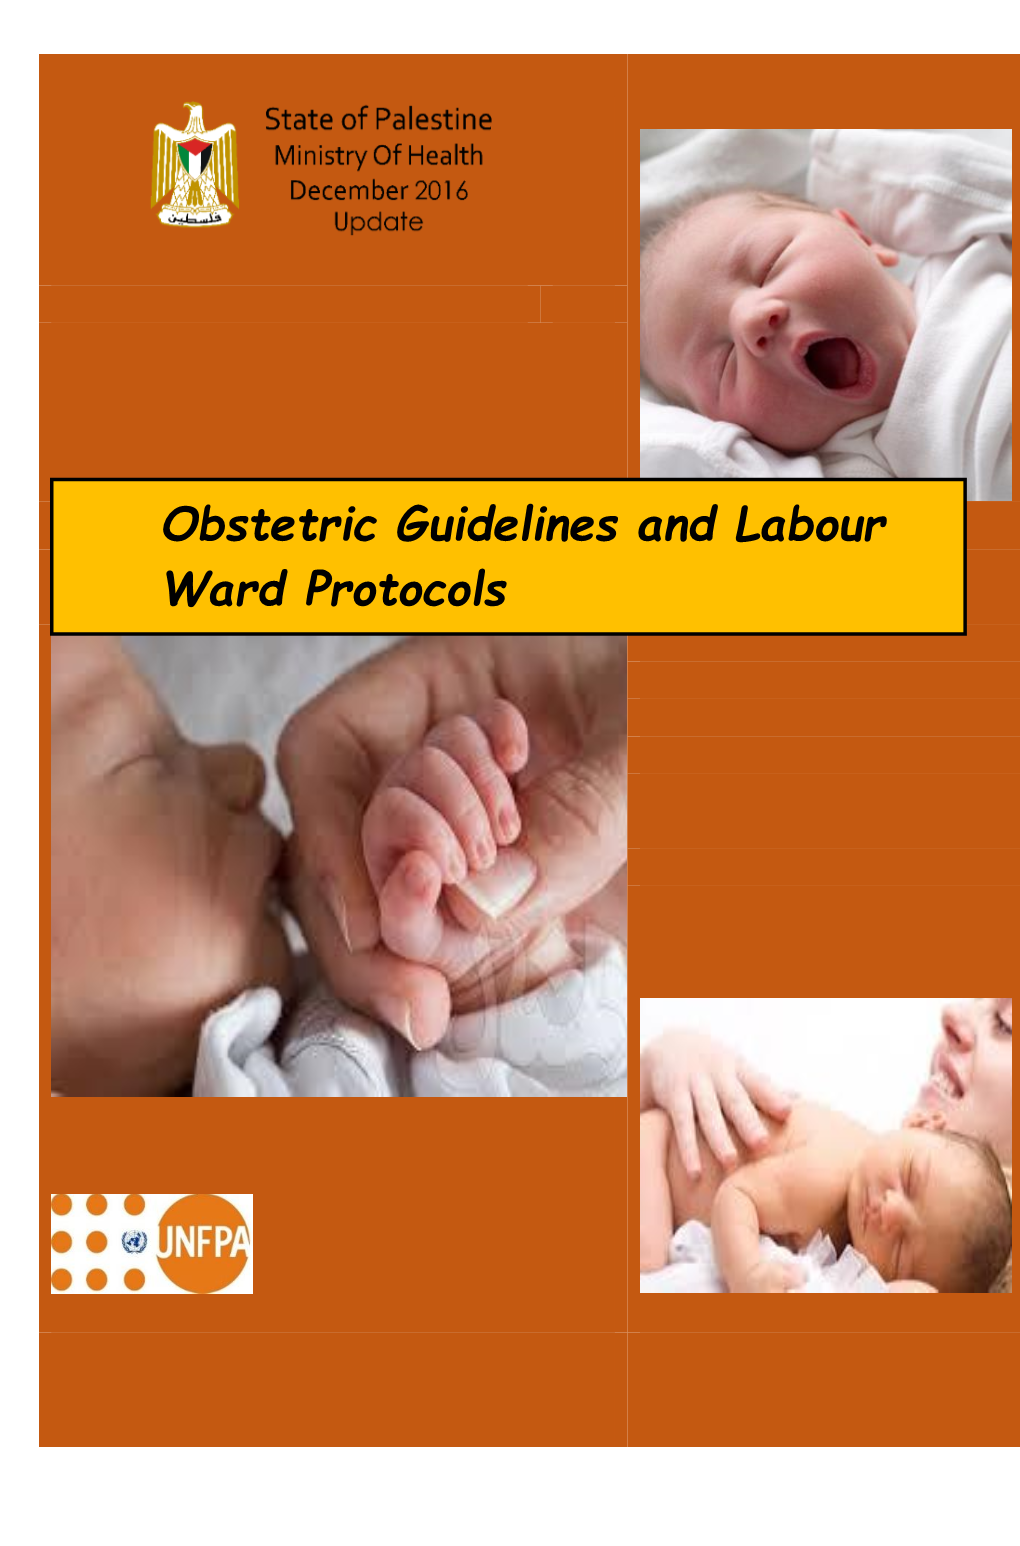 Obstetric Guidelines and Labour Ward Protocols